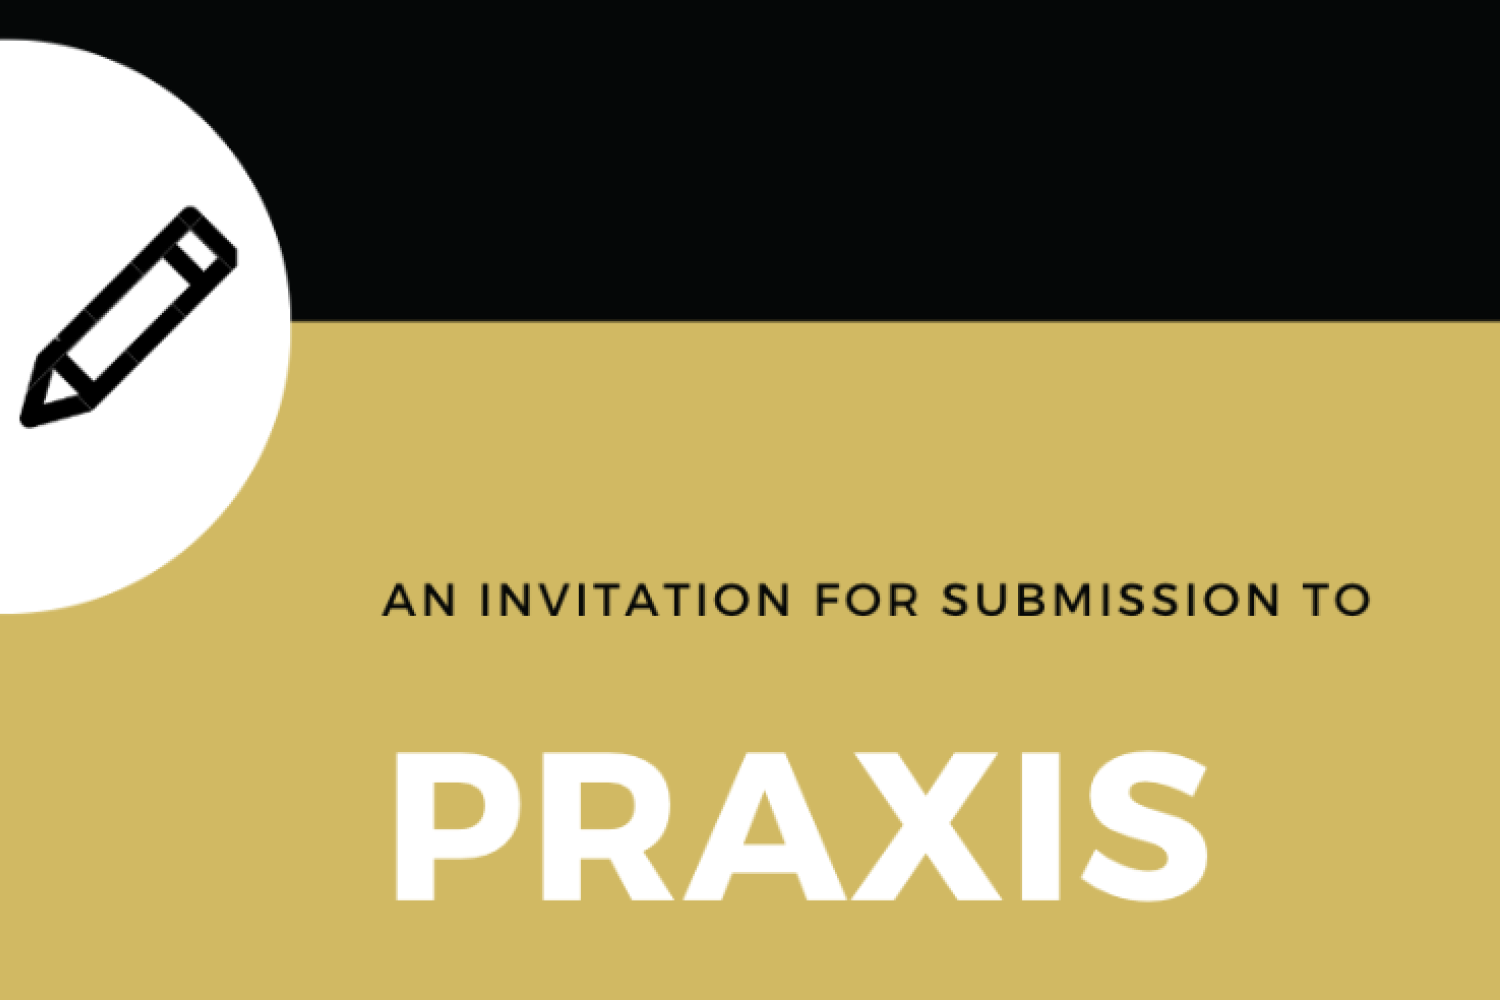 An Invitation to submit to praxis